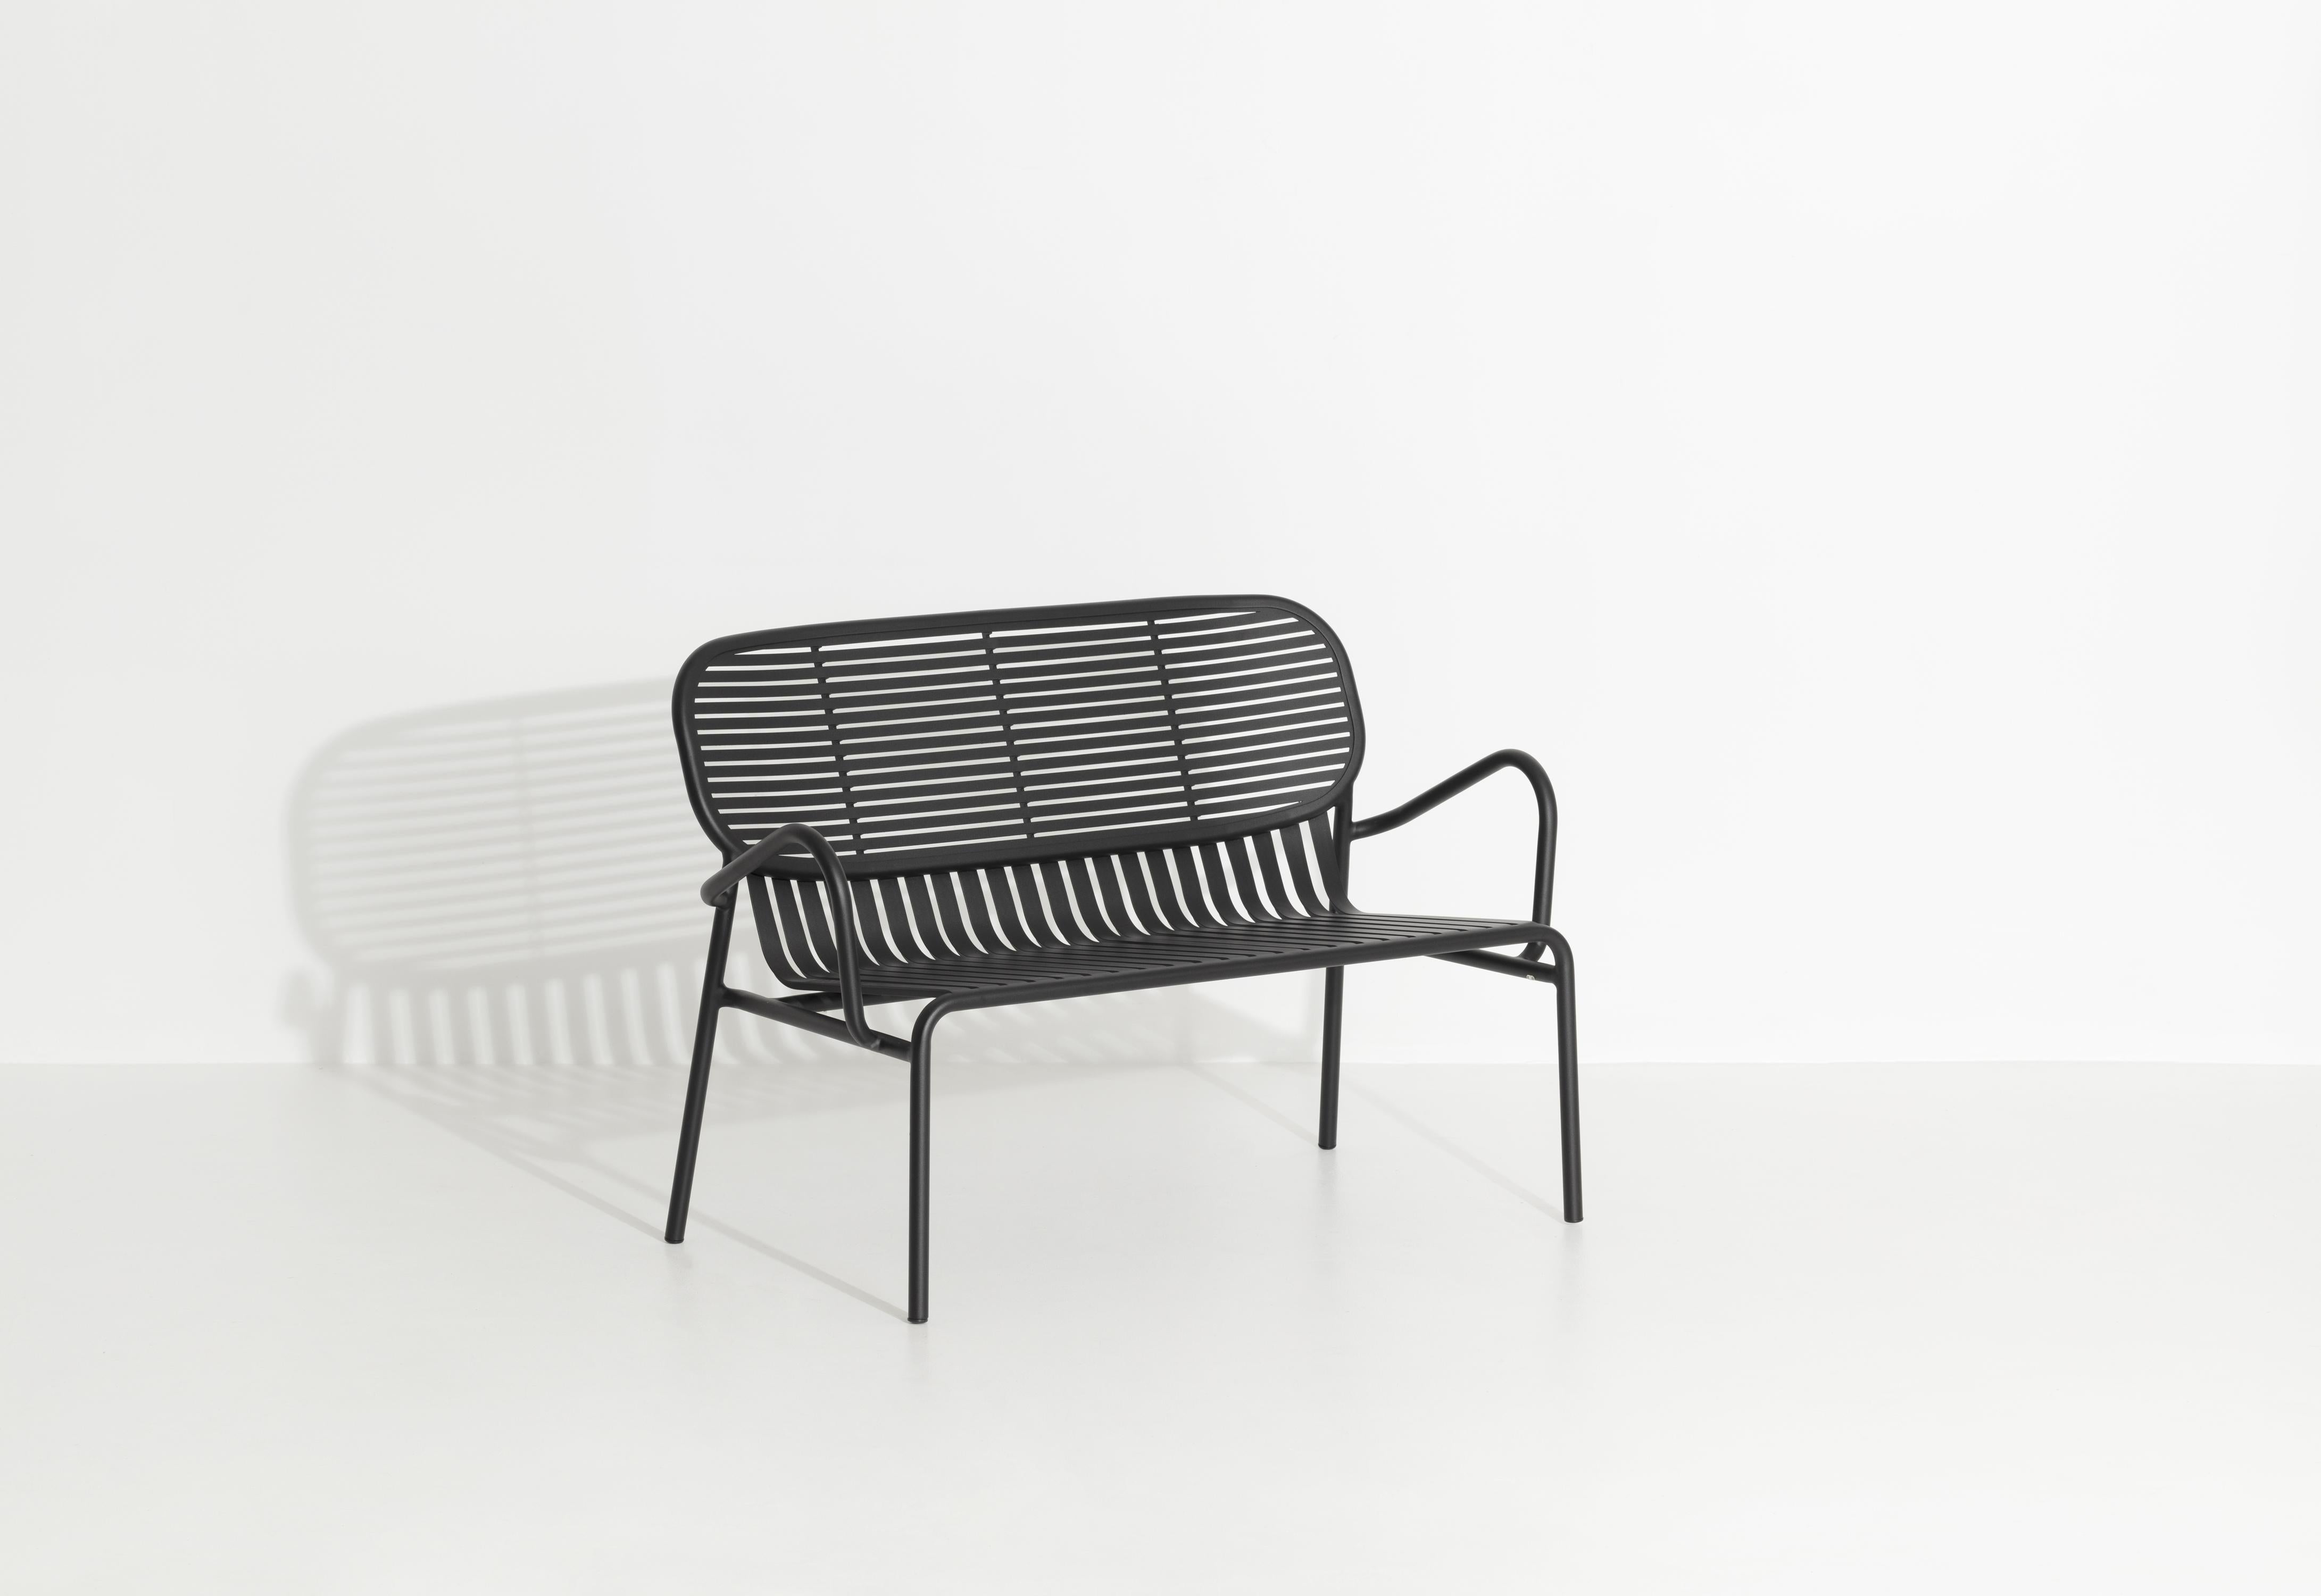 Petite Friture Week-End Sofa in Black Aluminium by Studio BrichetZiegler In New Condition For Sale In Brooklyn, NY